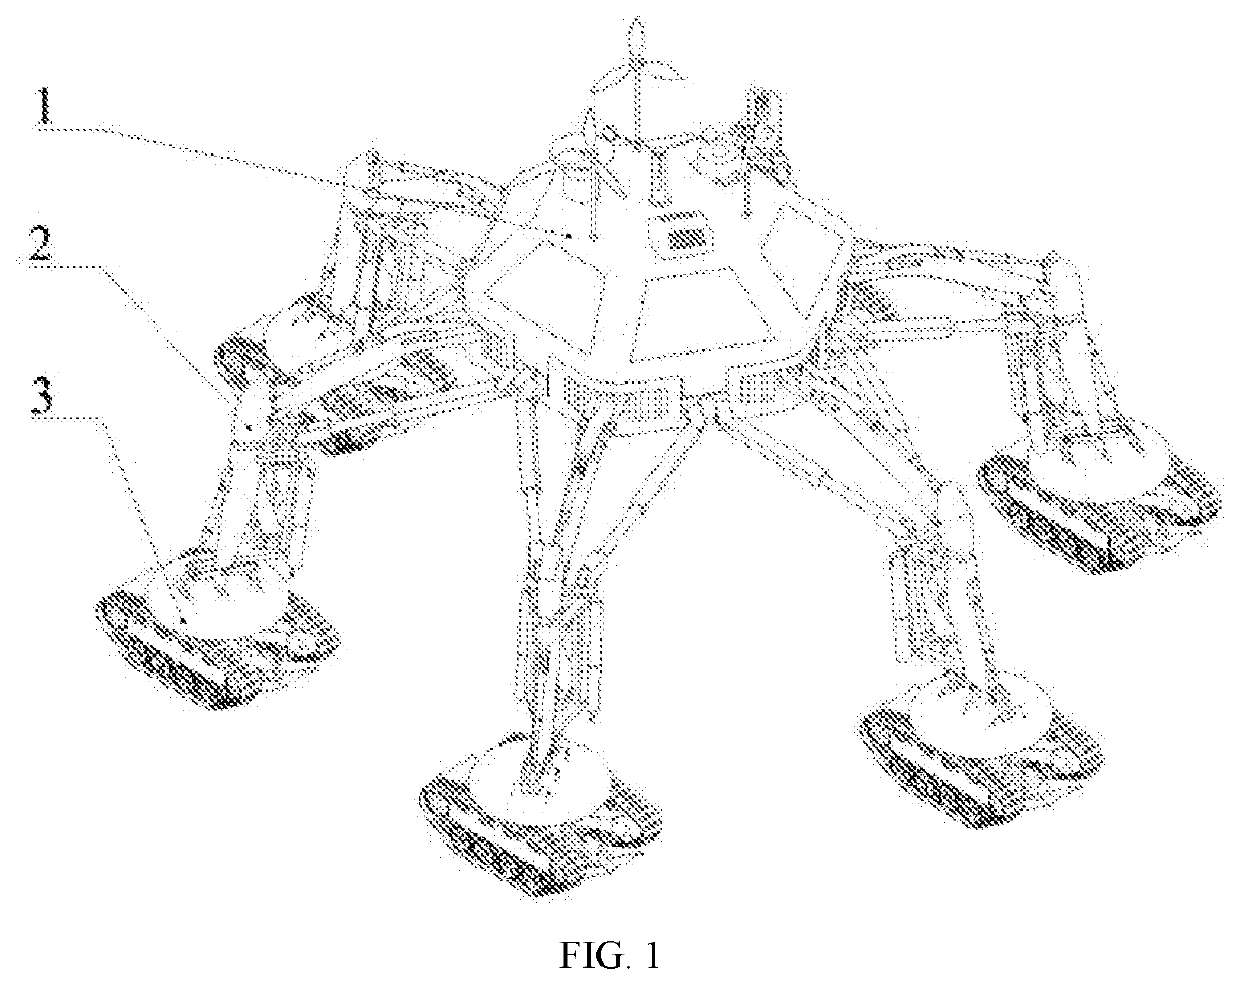 Giant six-legged polar research vehicle with tracked feet